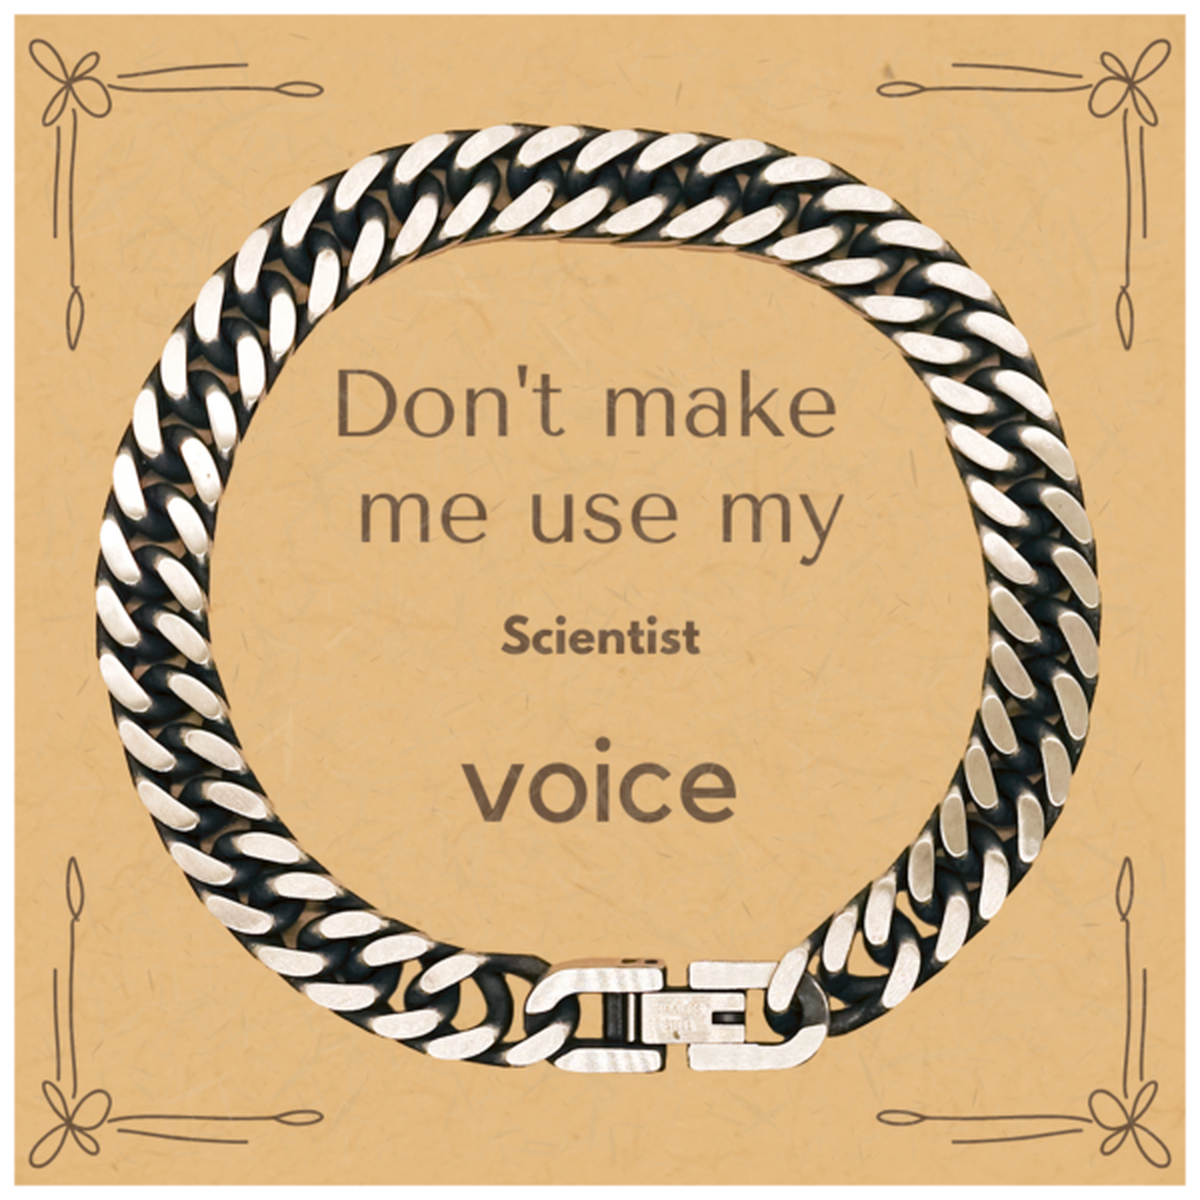 Don't make me use my Scientist voice, Sarcasm Scientist Card Gifts, Christmas Scientist Cuban Link Chain Bracelet Birthday Unique Gifts For Scientist Coworkers, Men, Women, Colleague, Friends